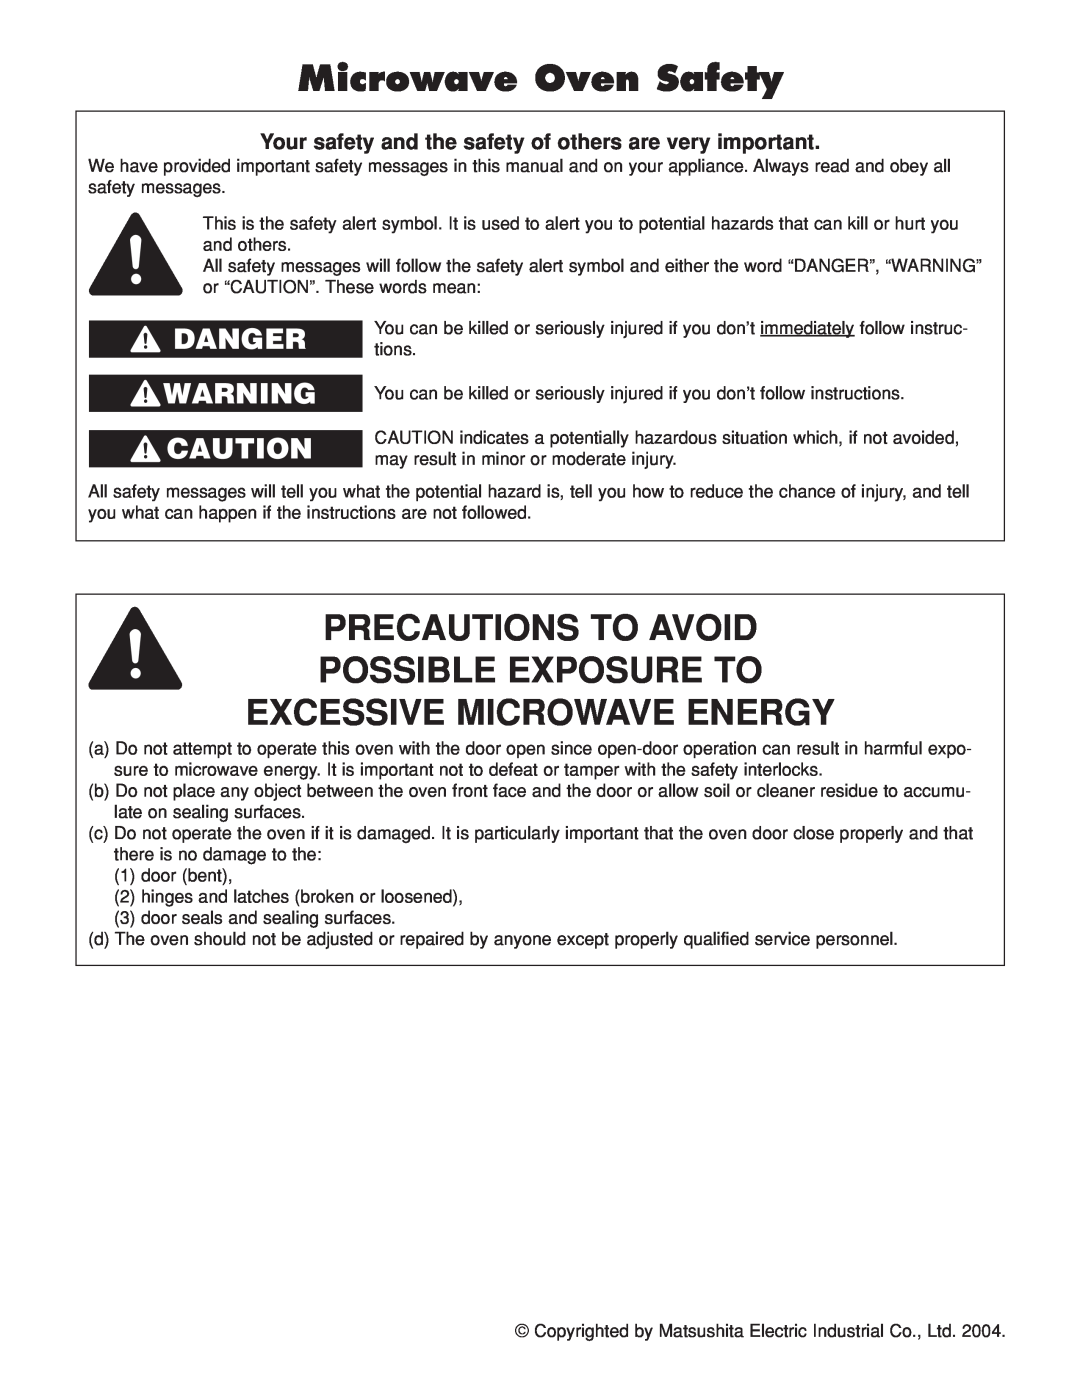 Panasonic NN-H264 Microwave Oven Safety, Precautions To Avoid Possible Exposure To, Excessive Microwave Energy, Danger 